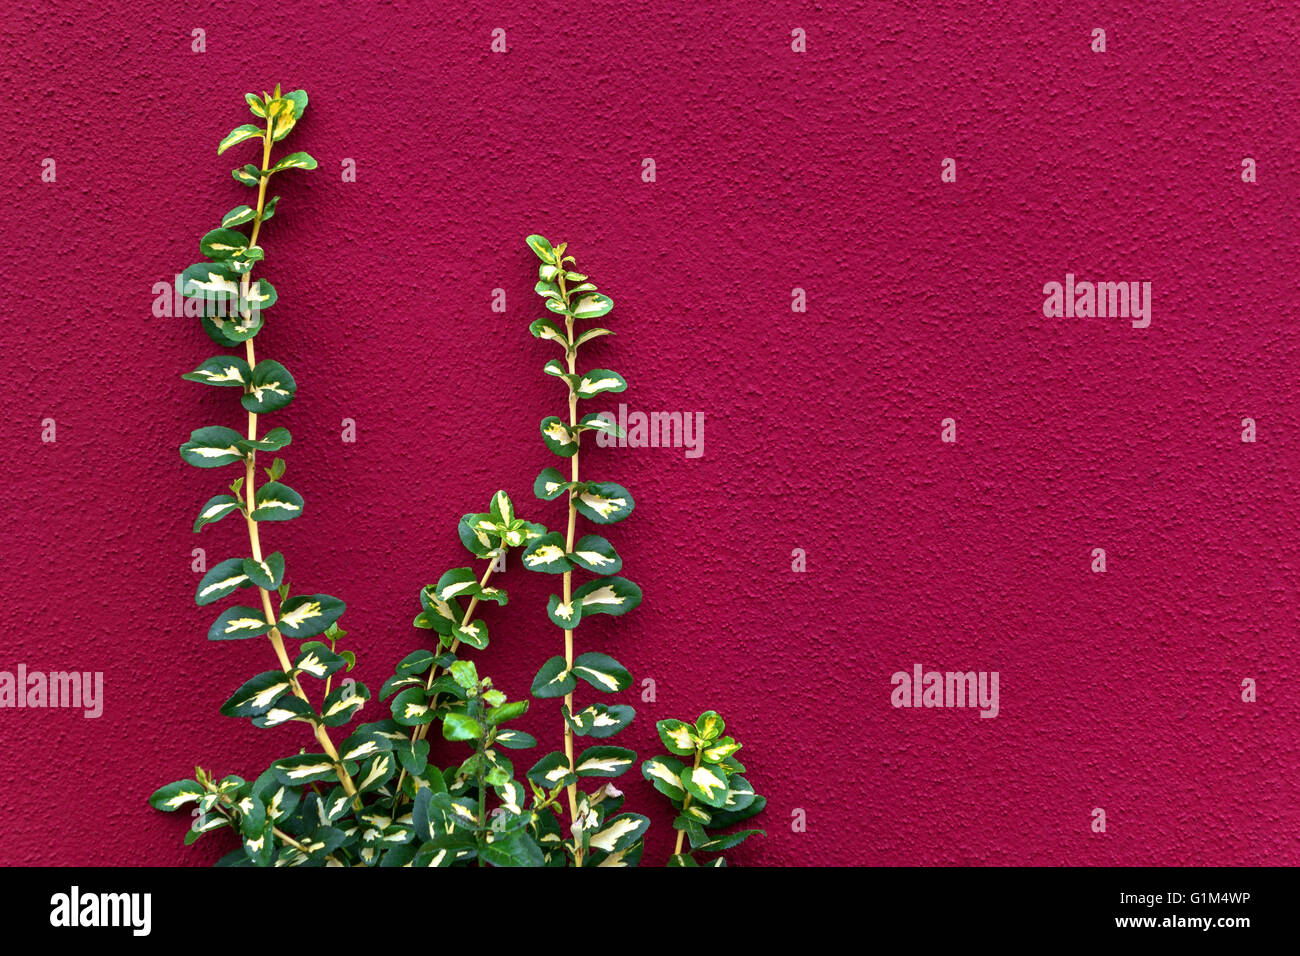 Green plant against a pink wall Stock Photo